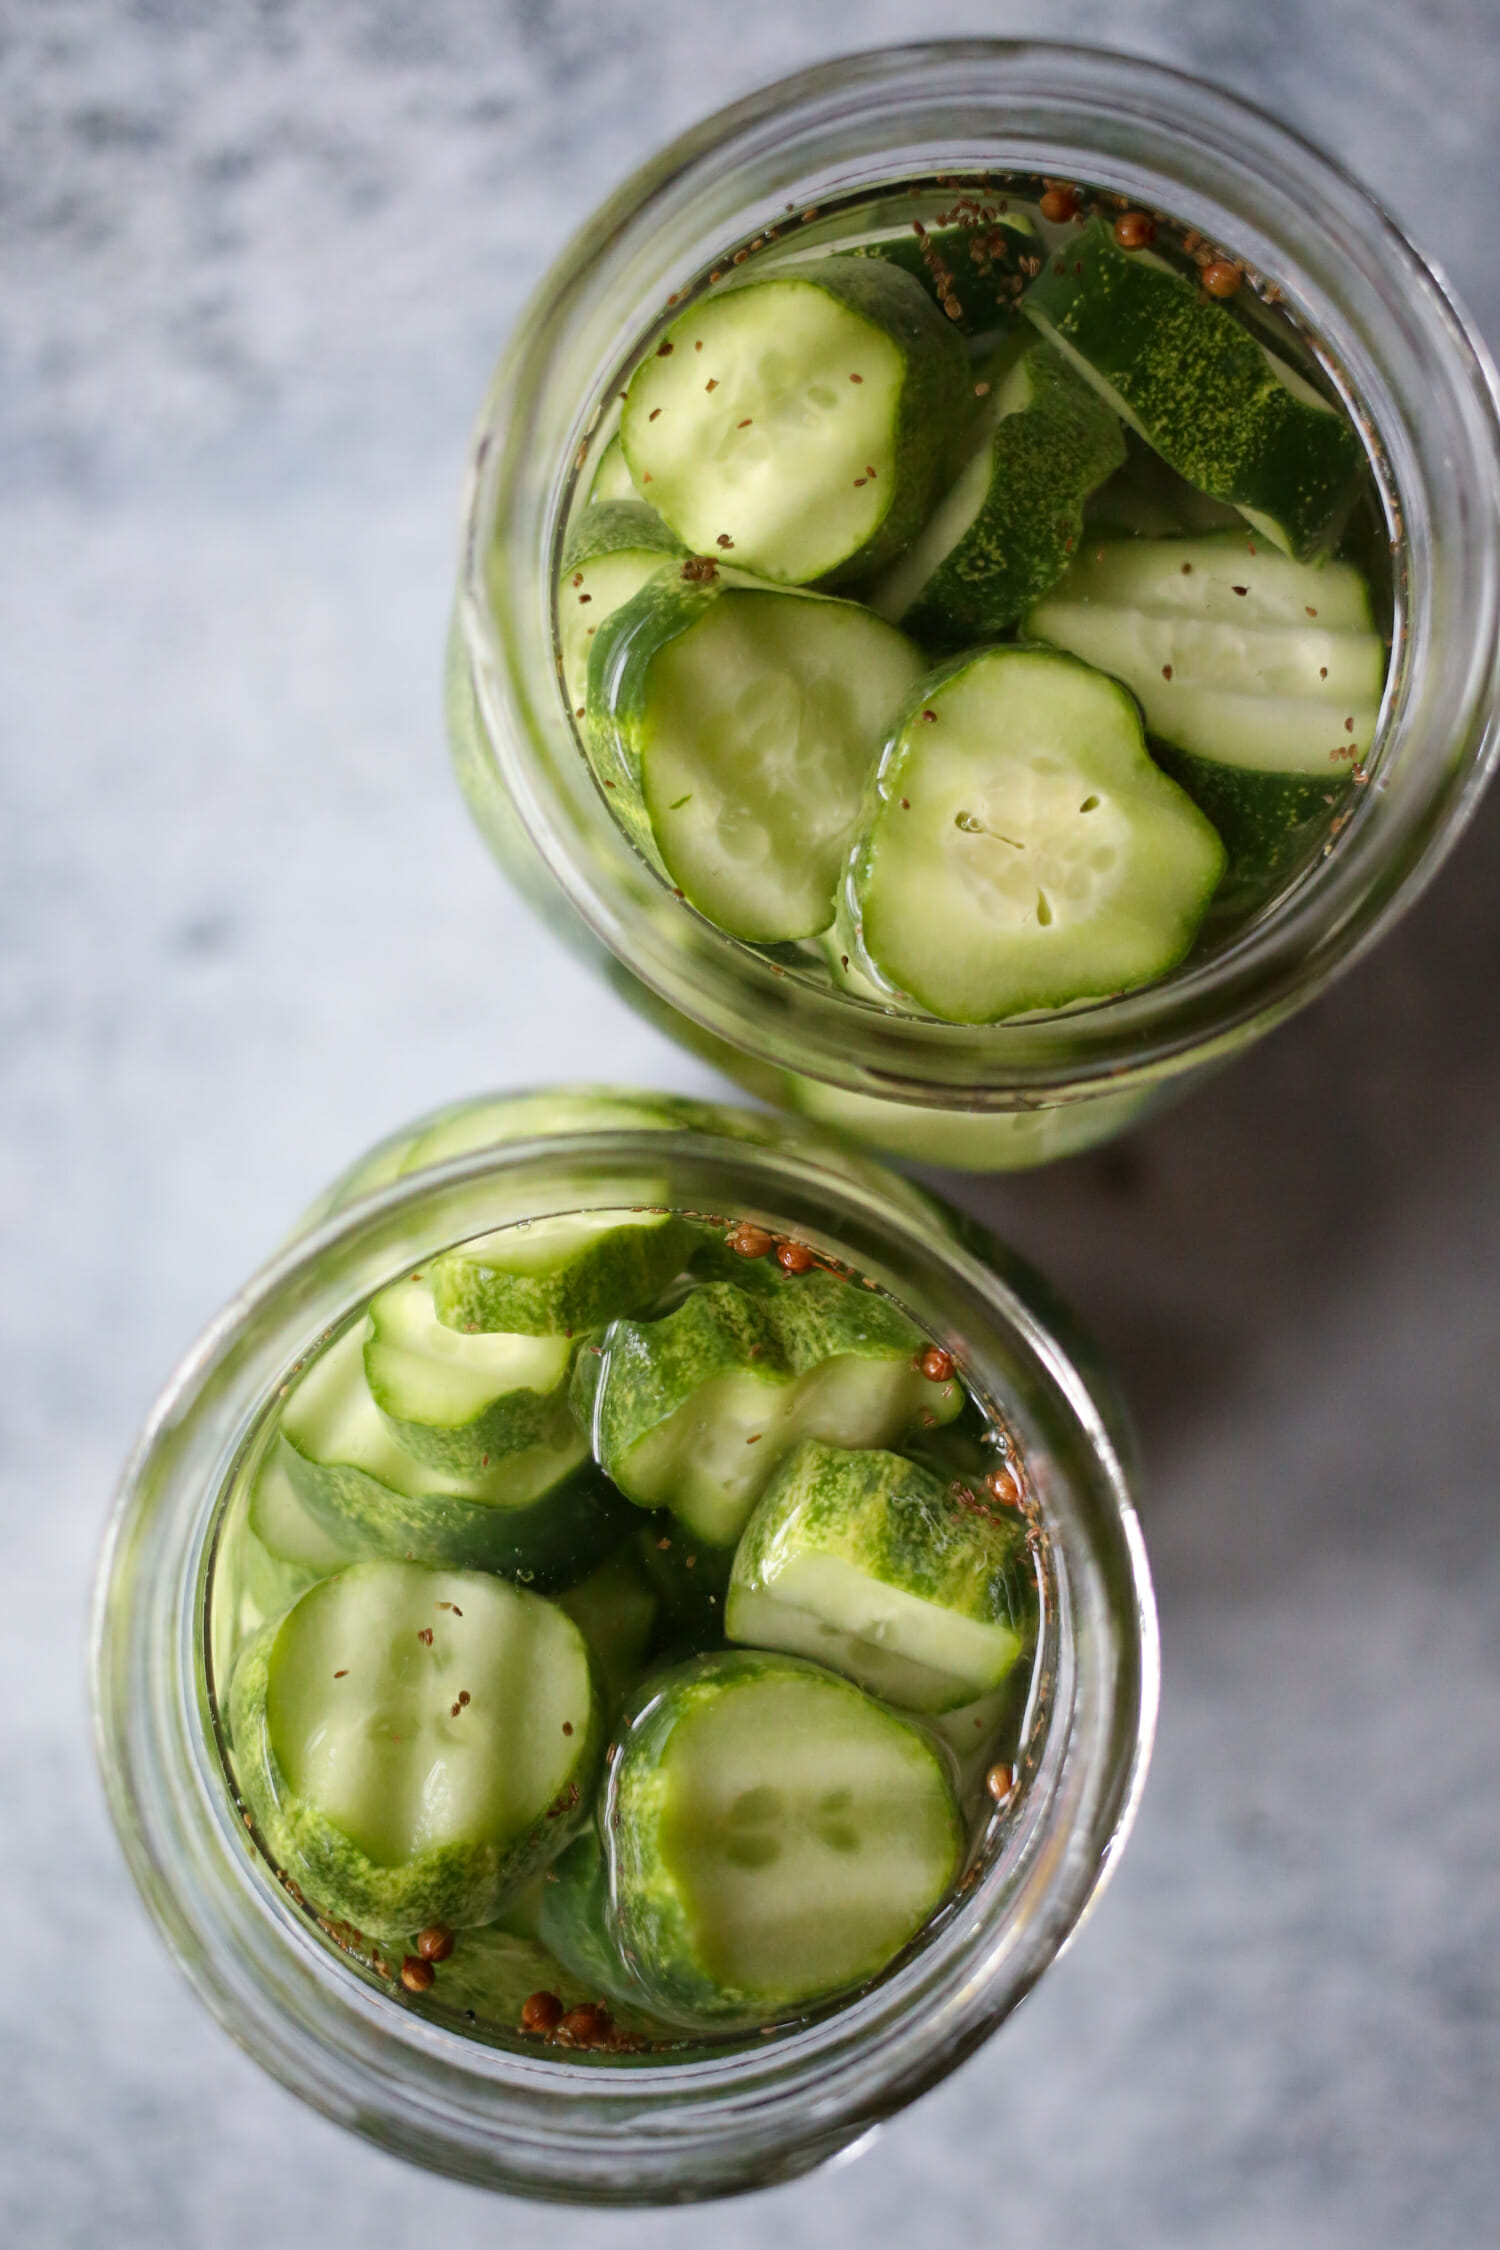 refrigerator pickles from our best bites